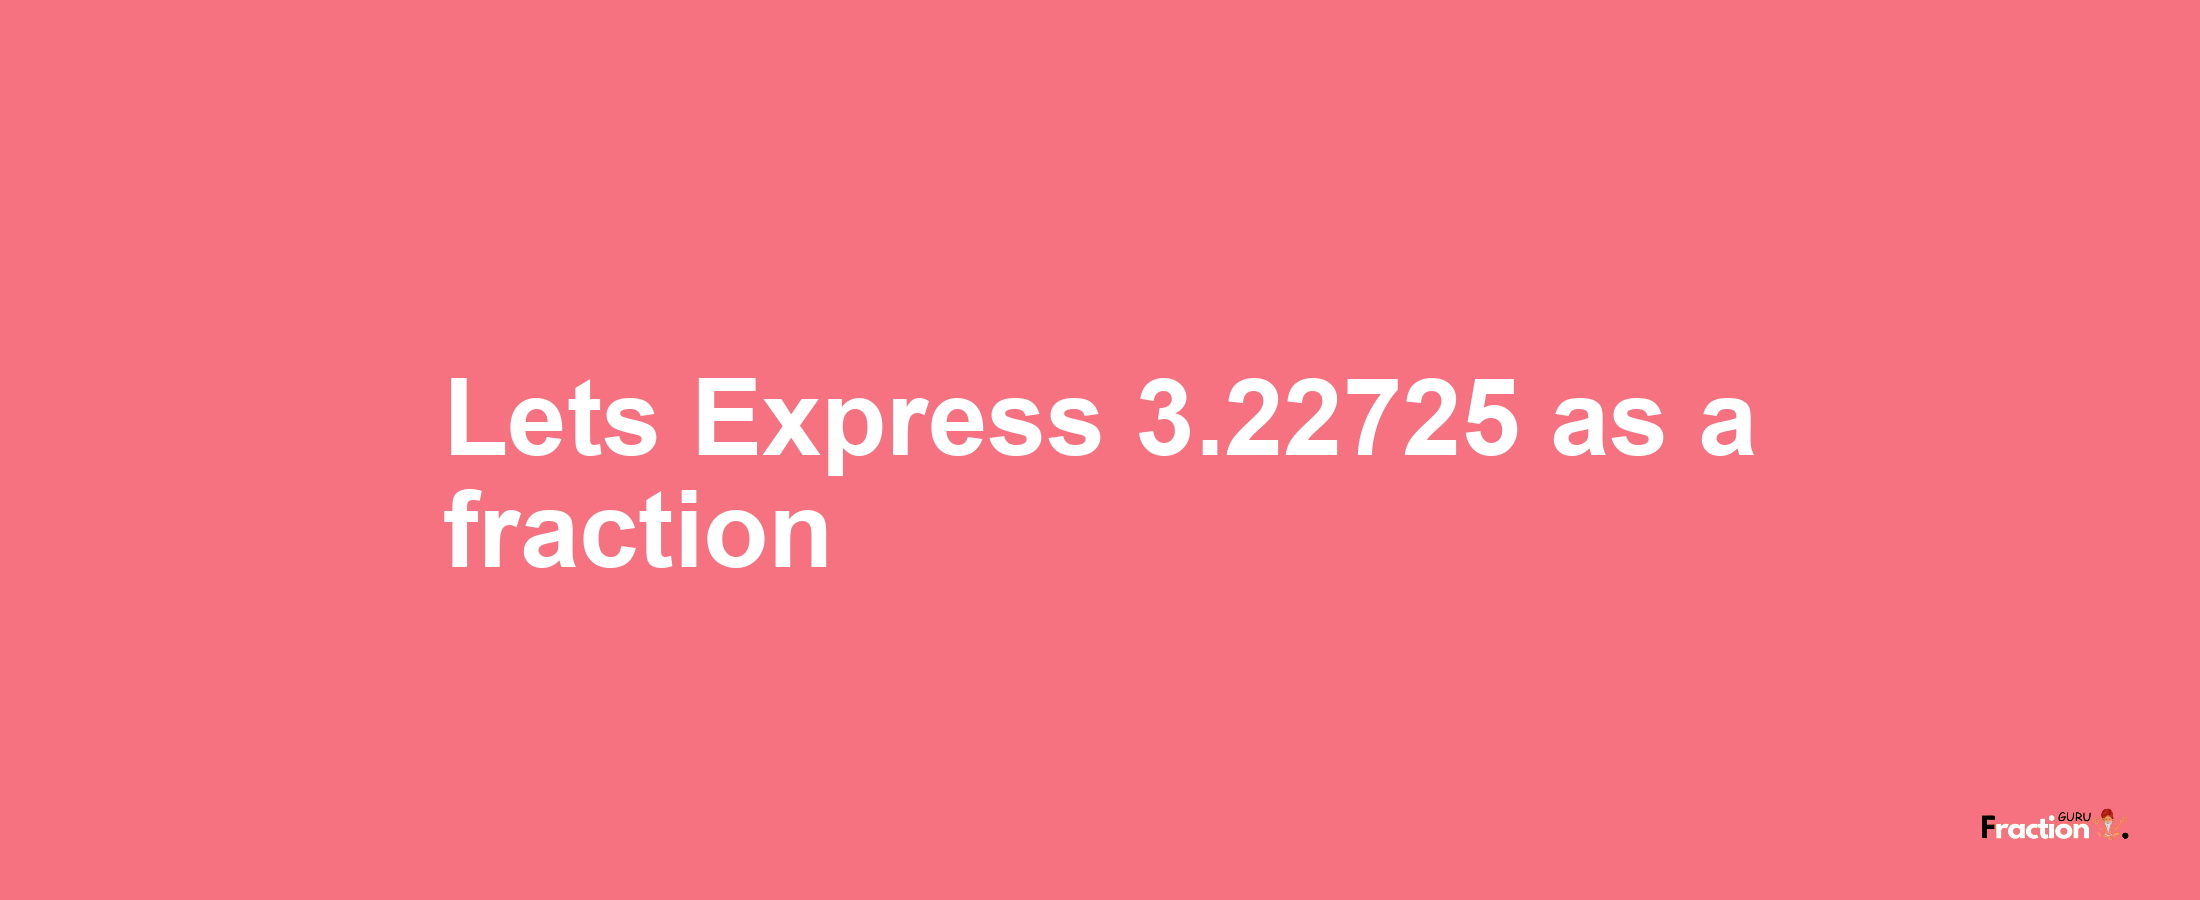 Lets Express 3.22725 as afraction